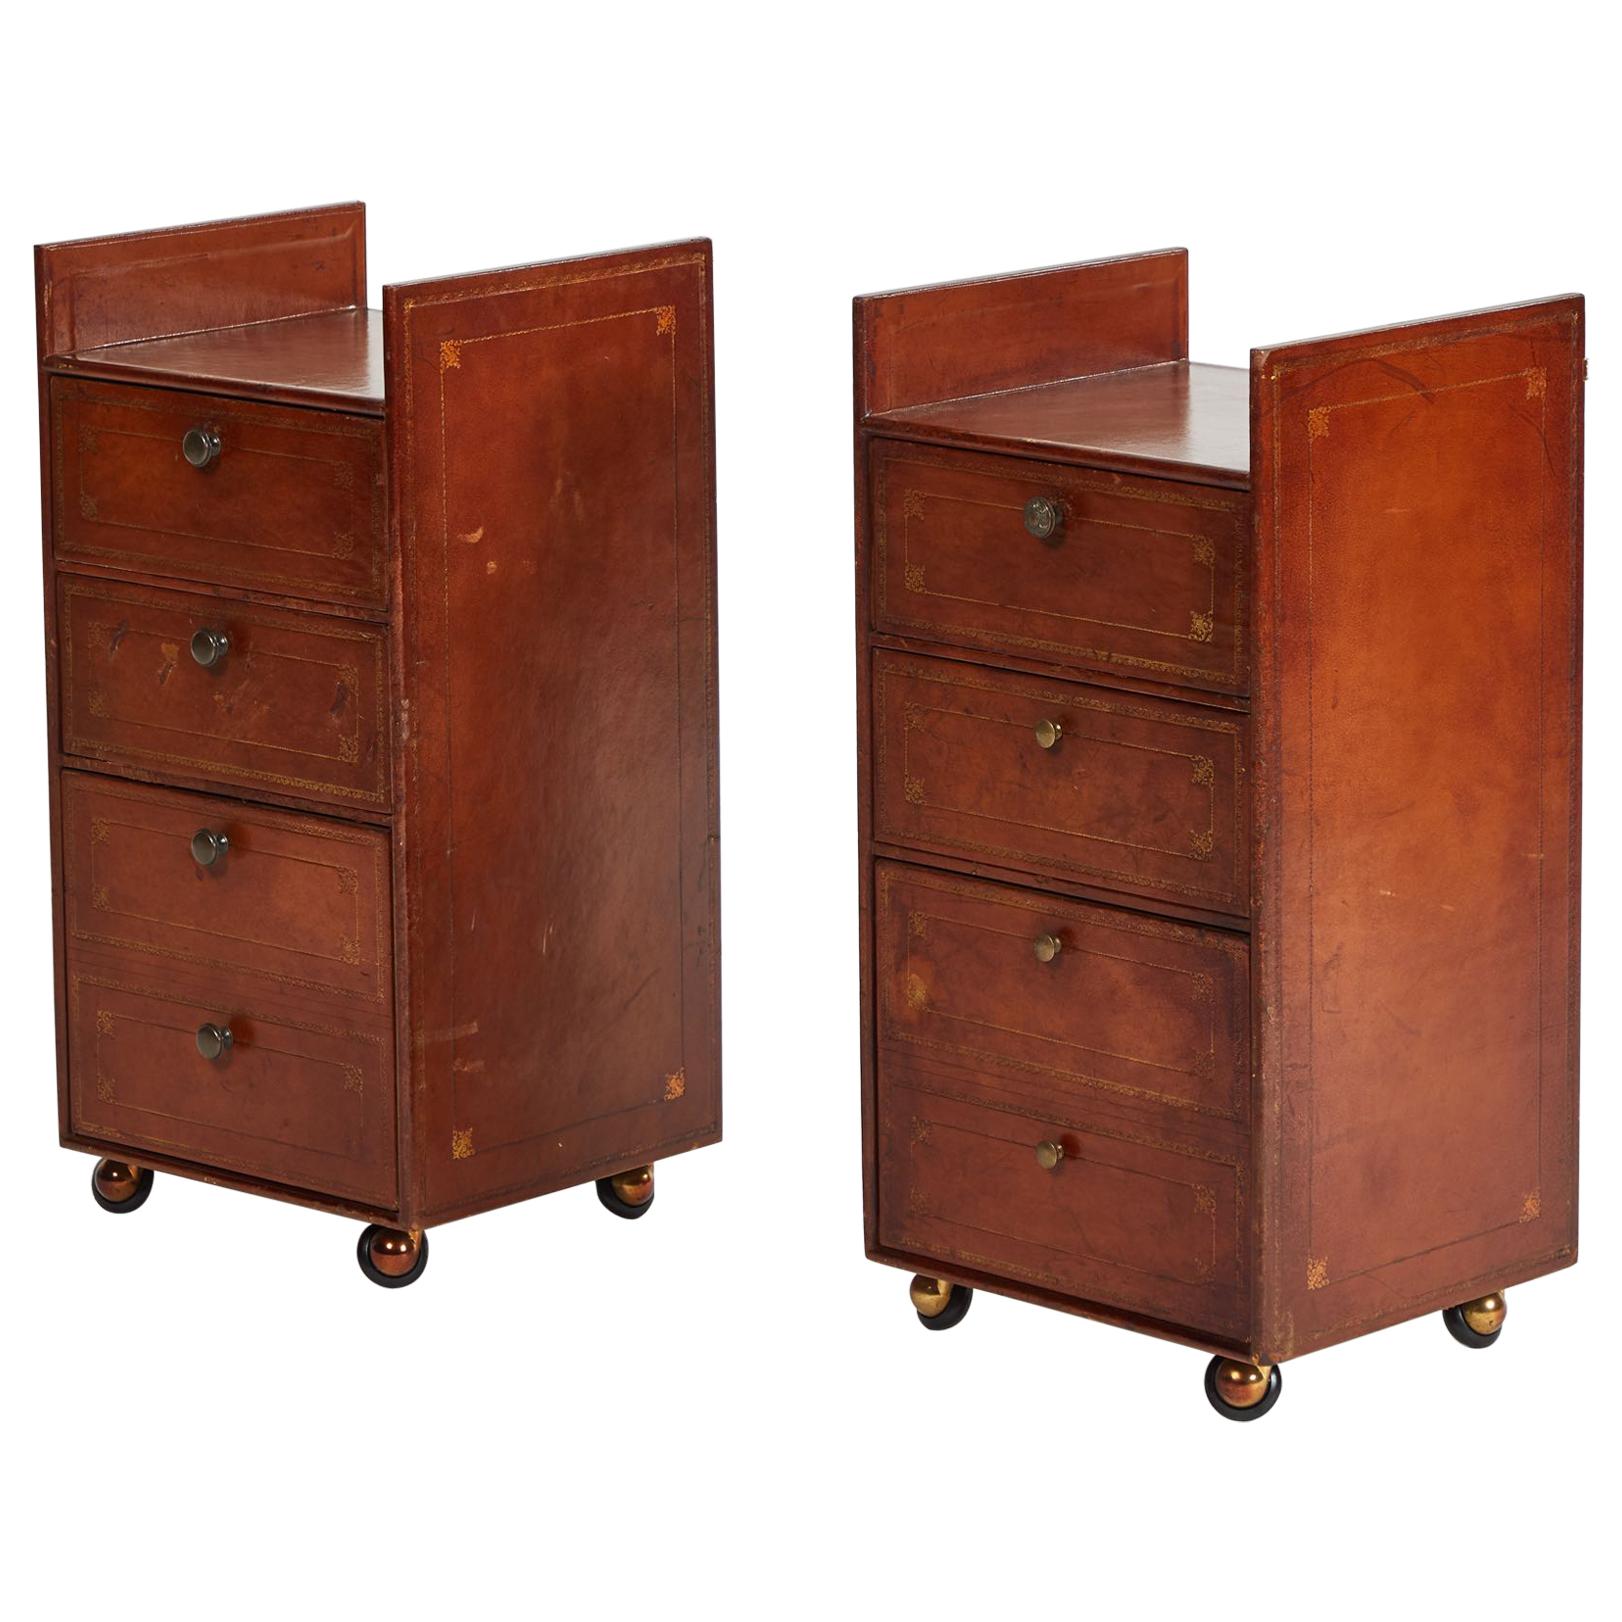 Pair of Bedside Tables in Leather